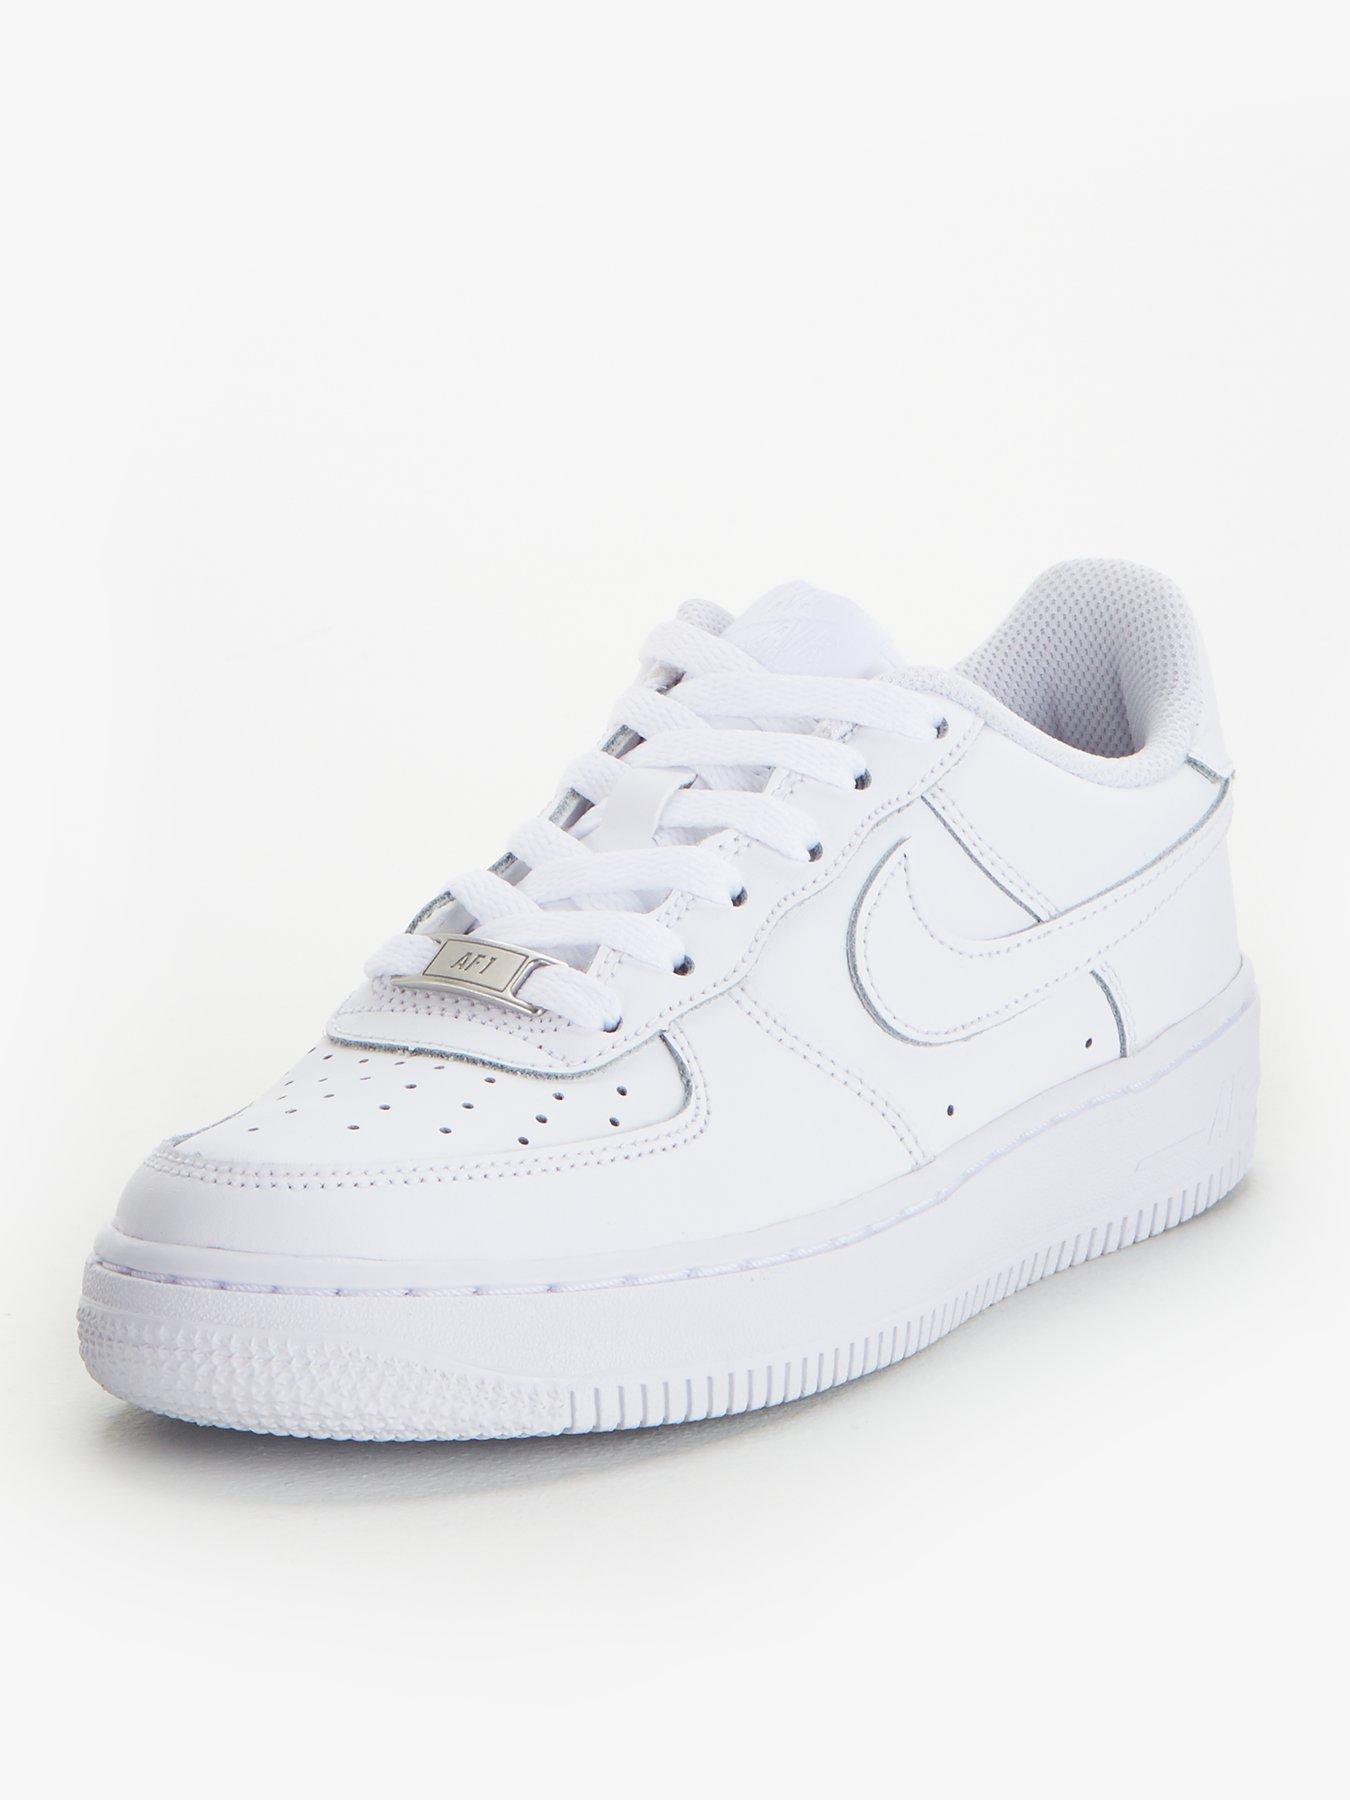 air force 1 low size 5.5